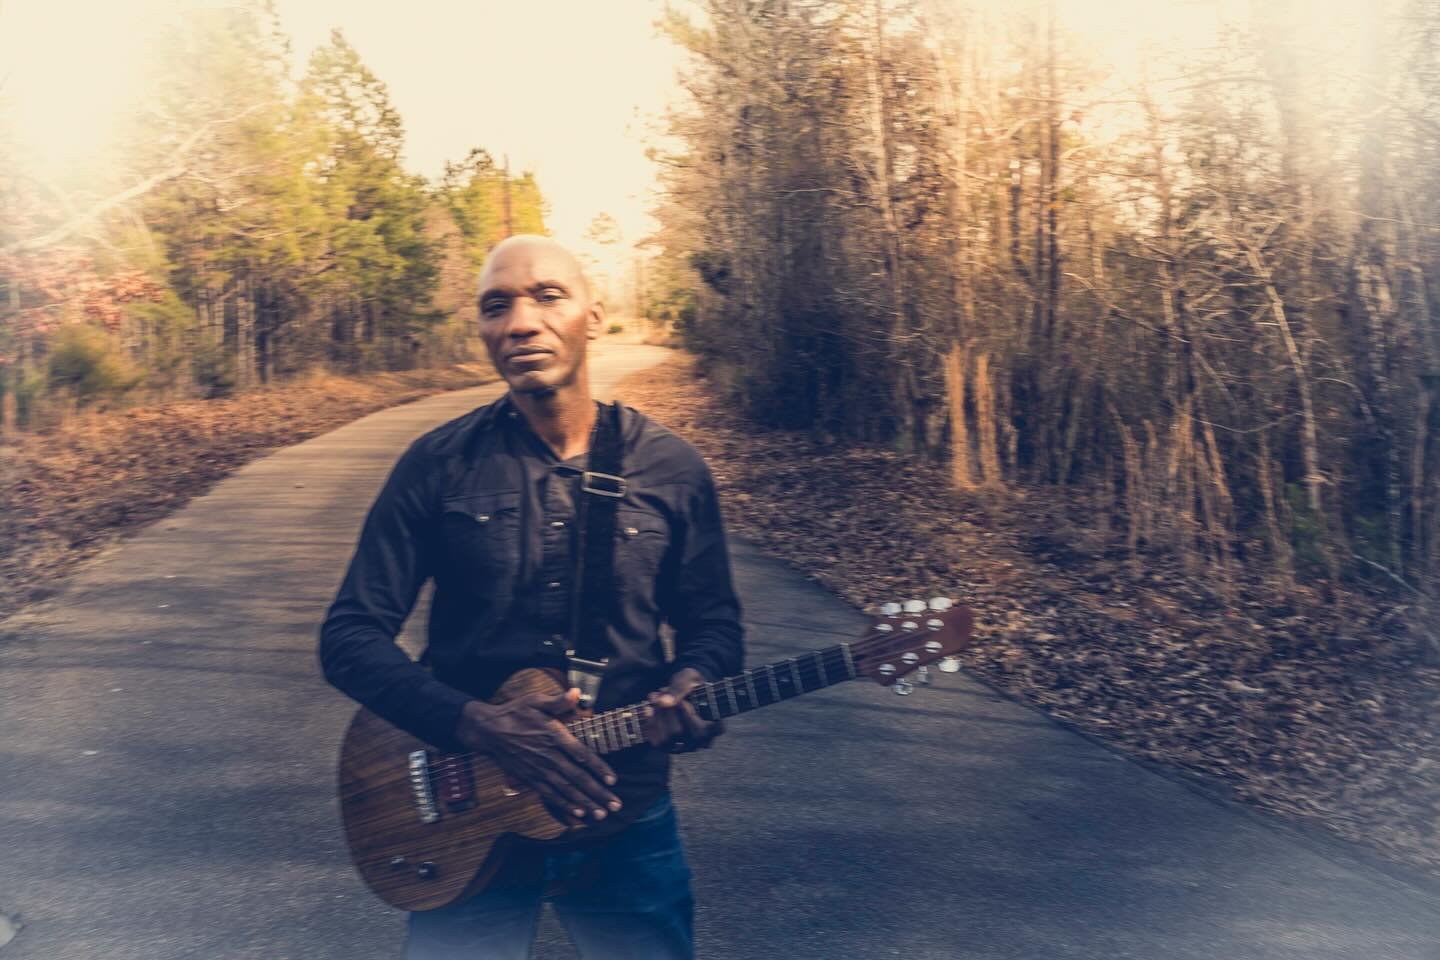 Cedric Burnside returns to Tractor once again on May 23rd! We&rsquo;re so sure you need to see Cedric live that we&rsquo;re giving one lucky winner a pair of tickets to the show. All you gotta do to enter is like this post and tag the friend you&rsqu